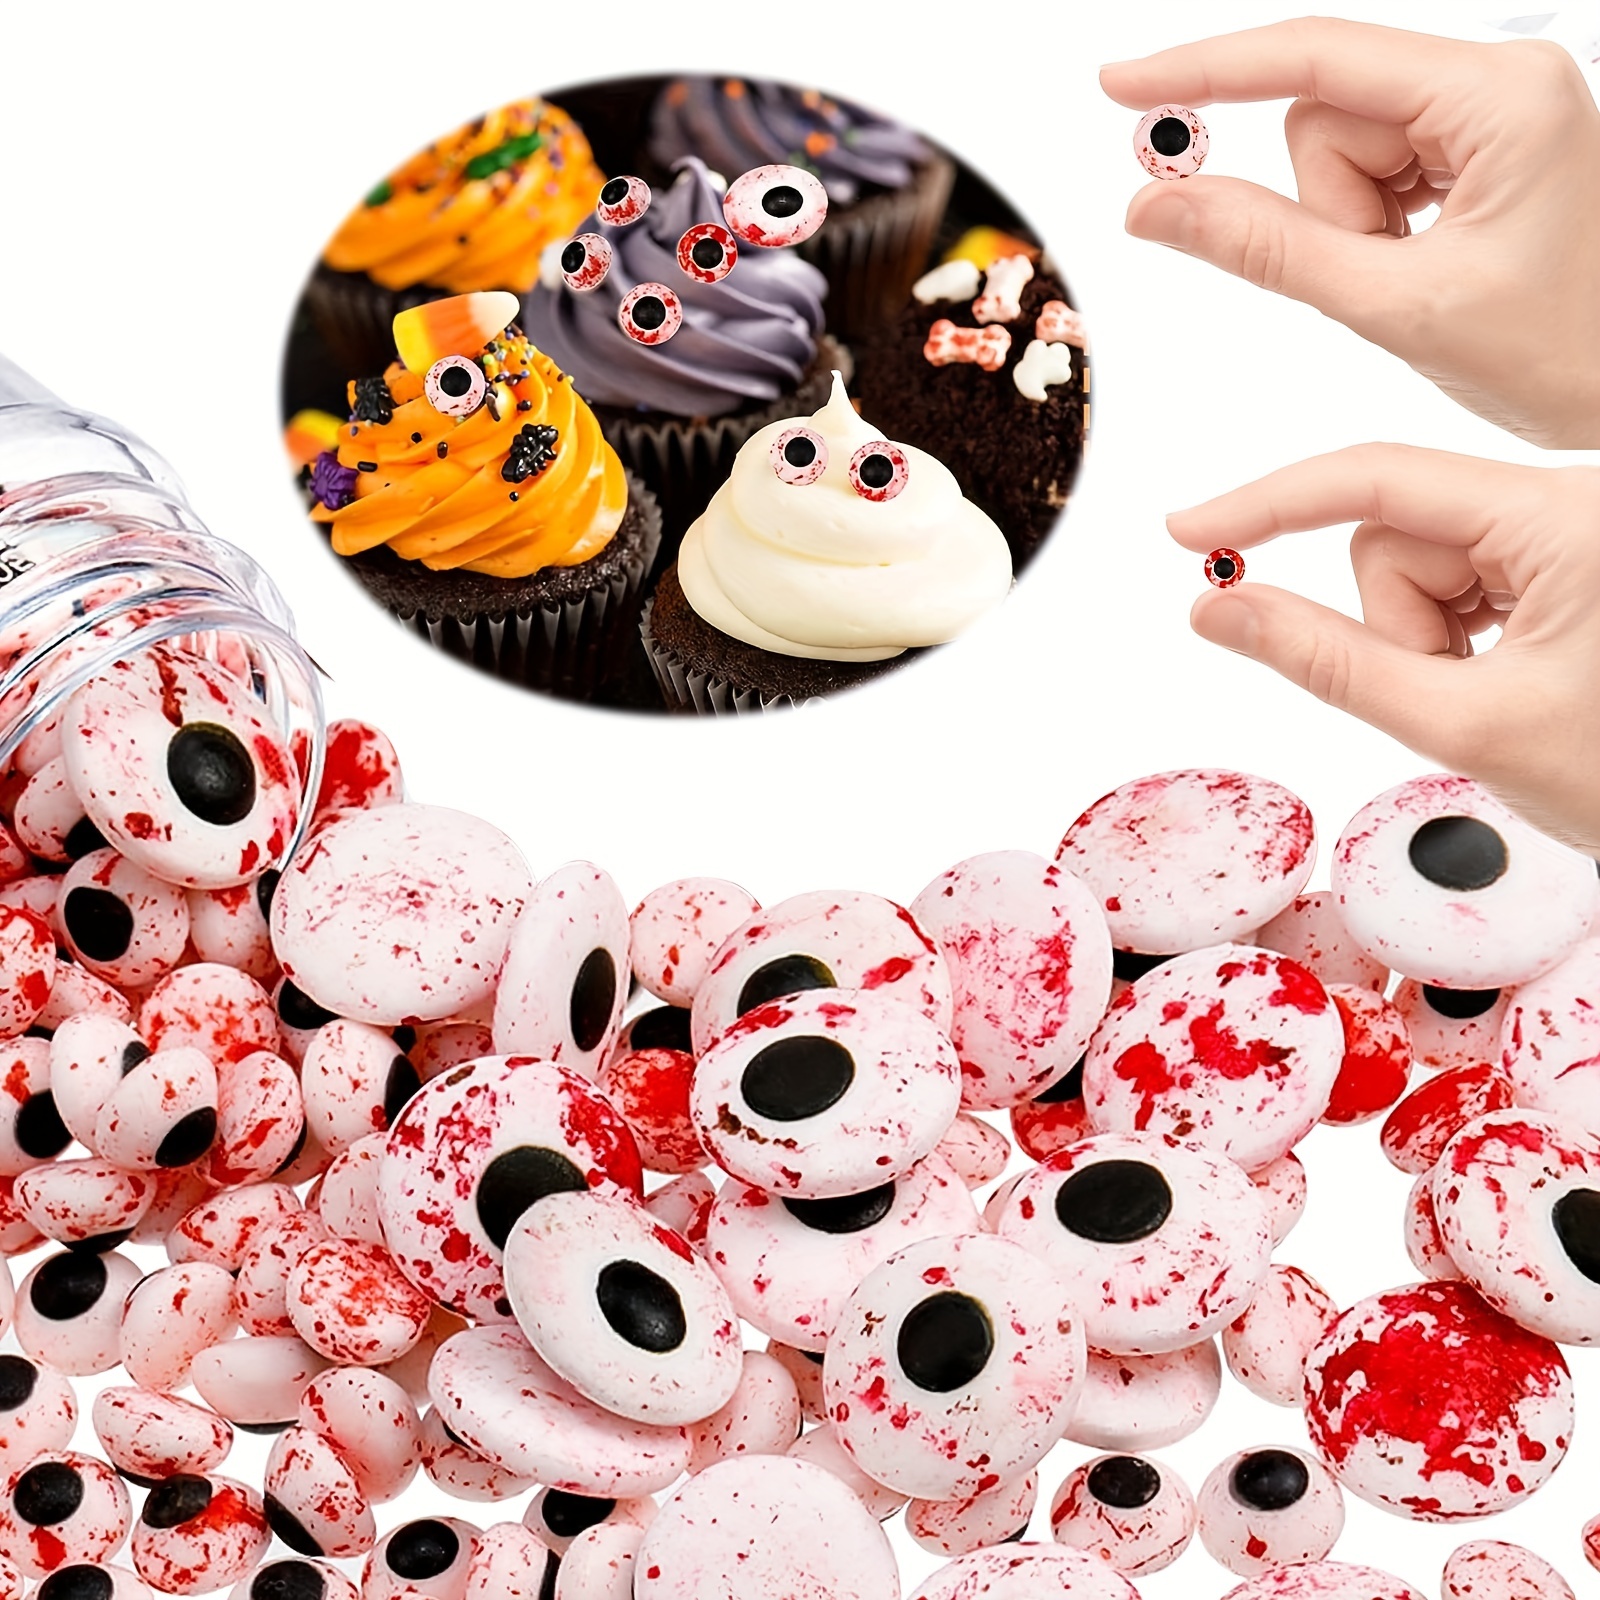 1 Bottle Candy Eyeballs Eyes Cake Cupcake Toppers Cookie Decorations Edible  Dessert Sprinkles for Halloween Christmas Cake Cupcakes Decoration Small  Eyes